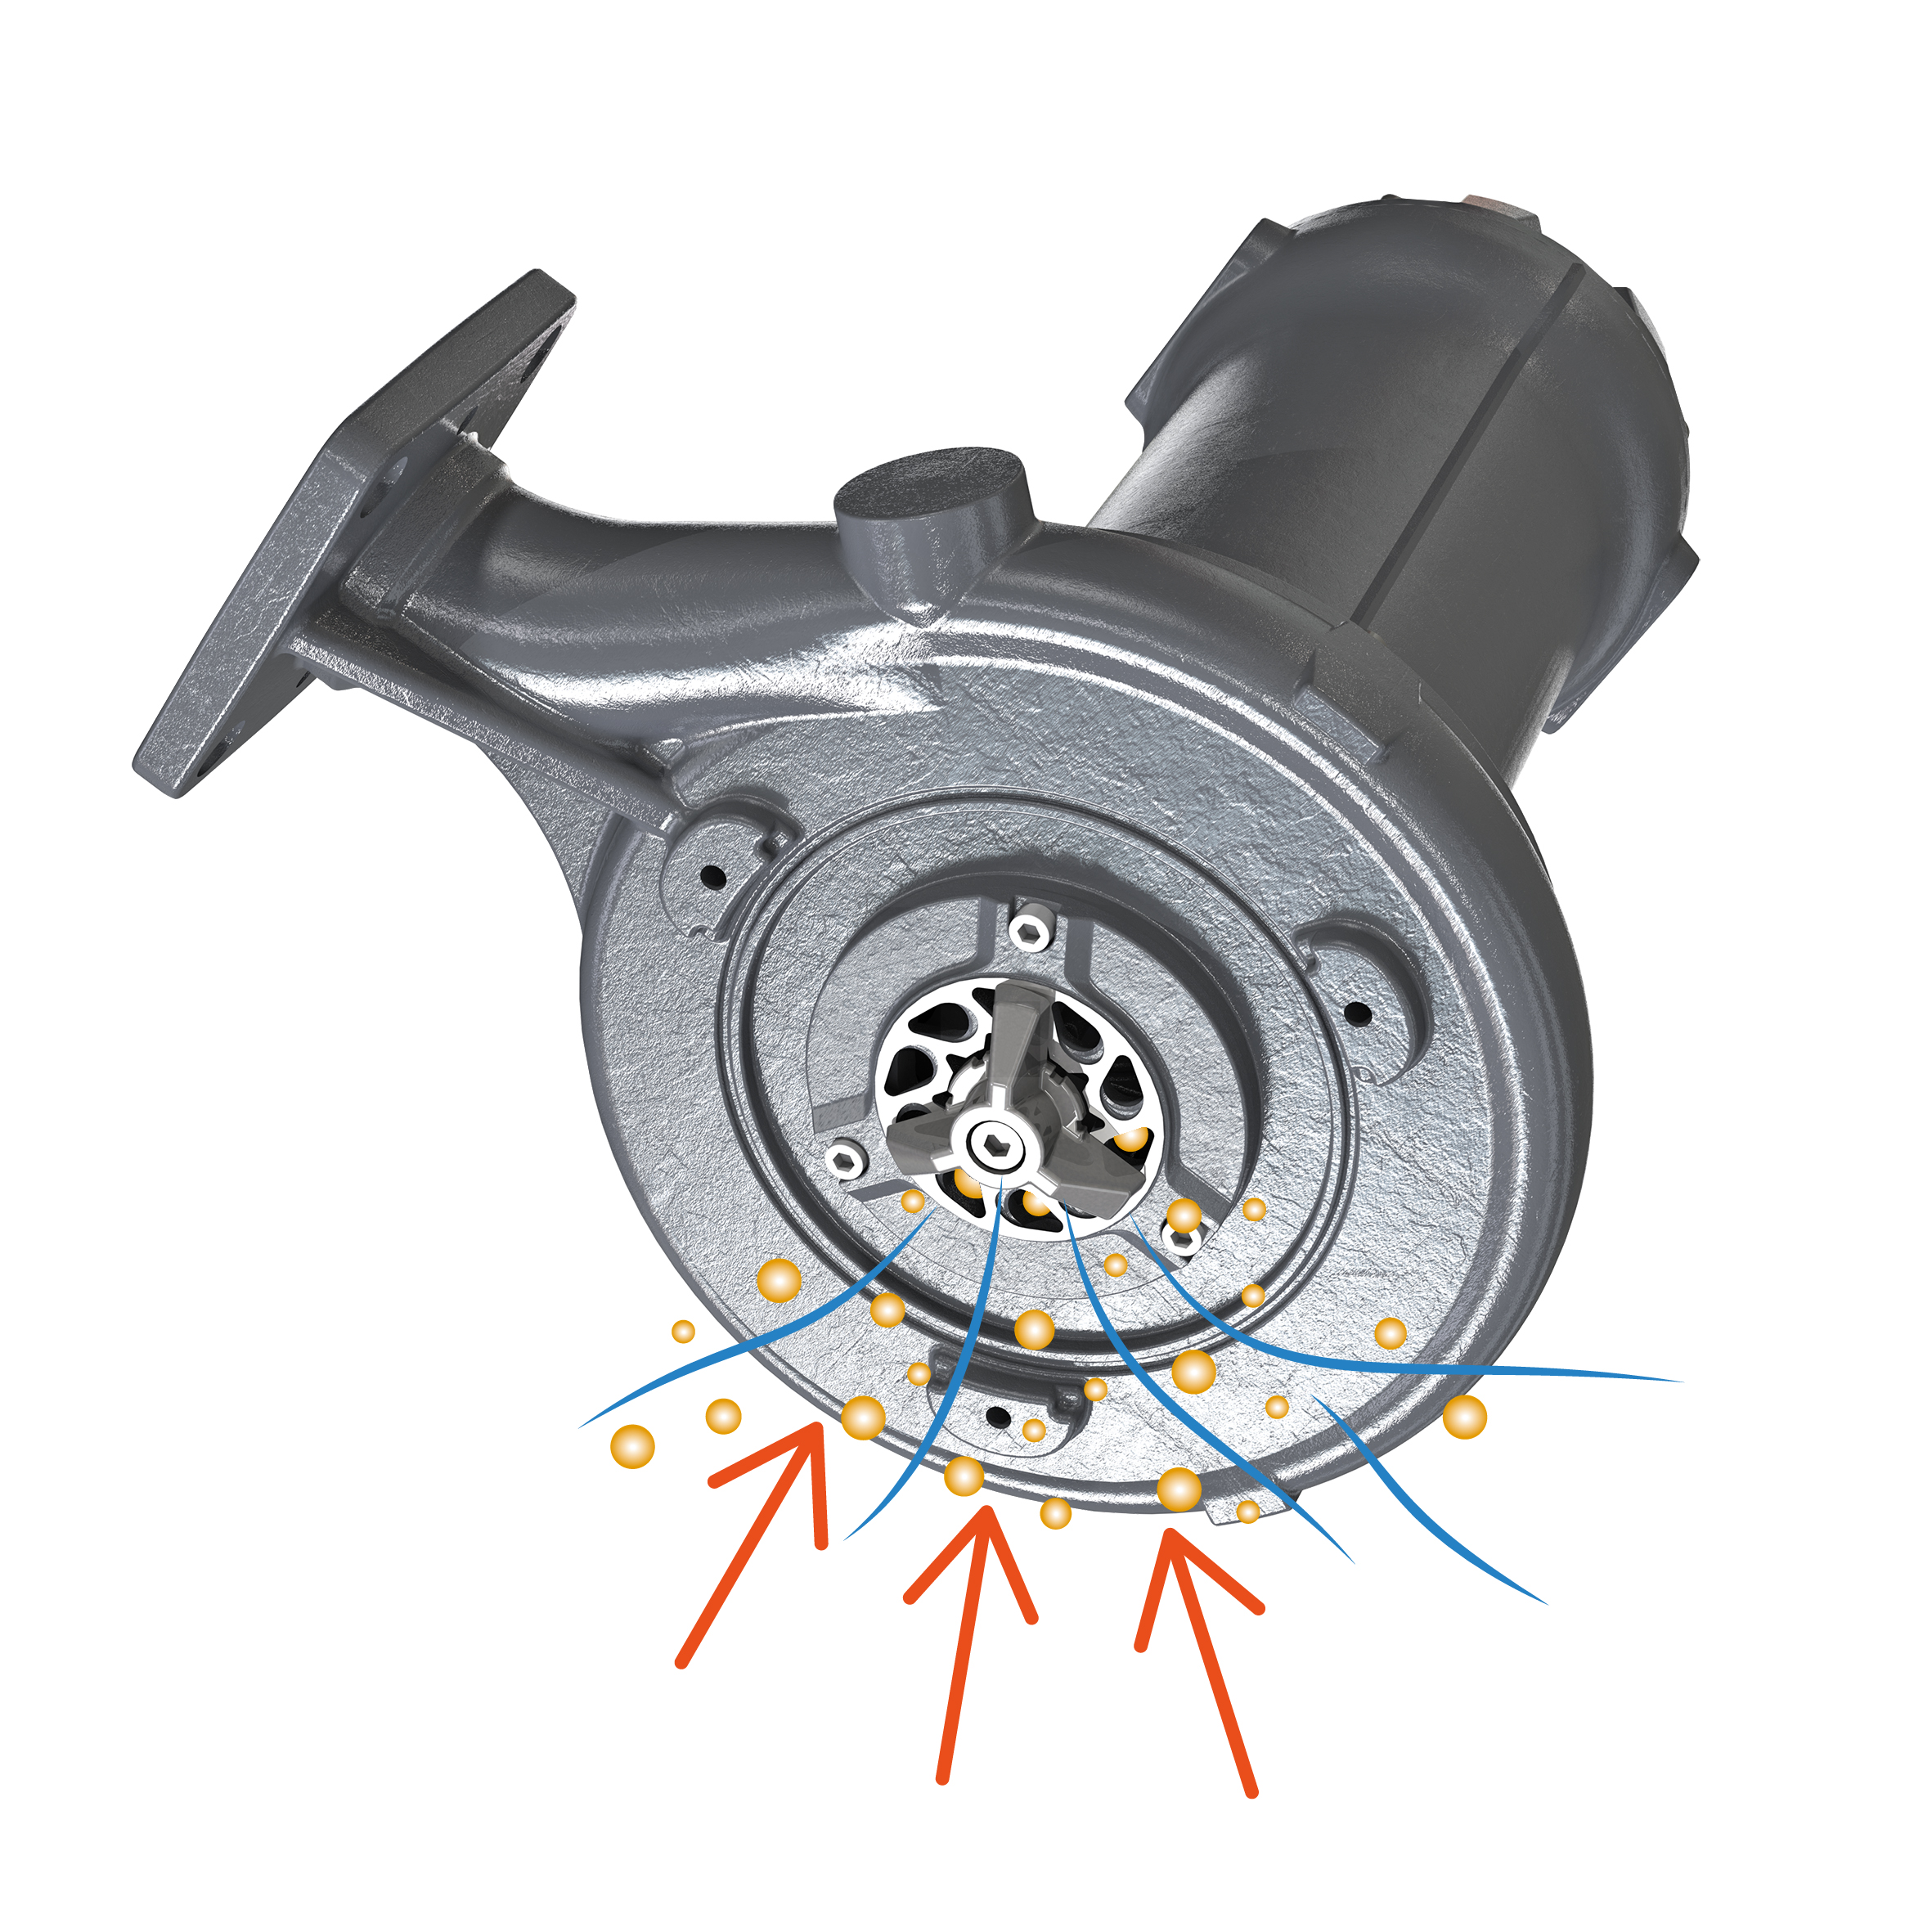 The rotation of the impeller creates a vacuum which draws the liquid towards the suction port of the pump through the holes in the plate of the shredding system.